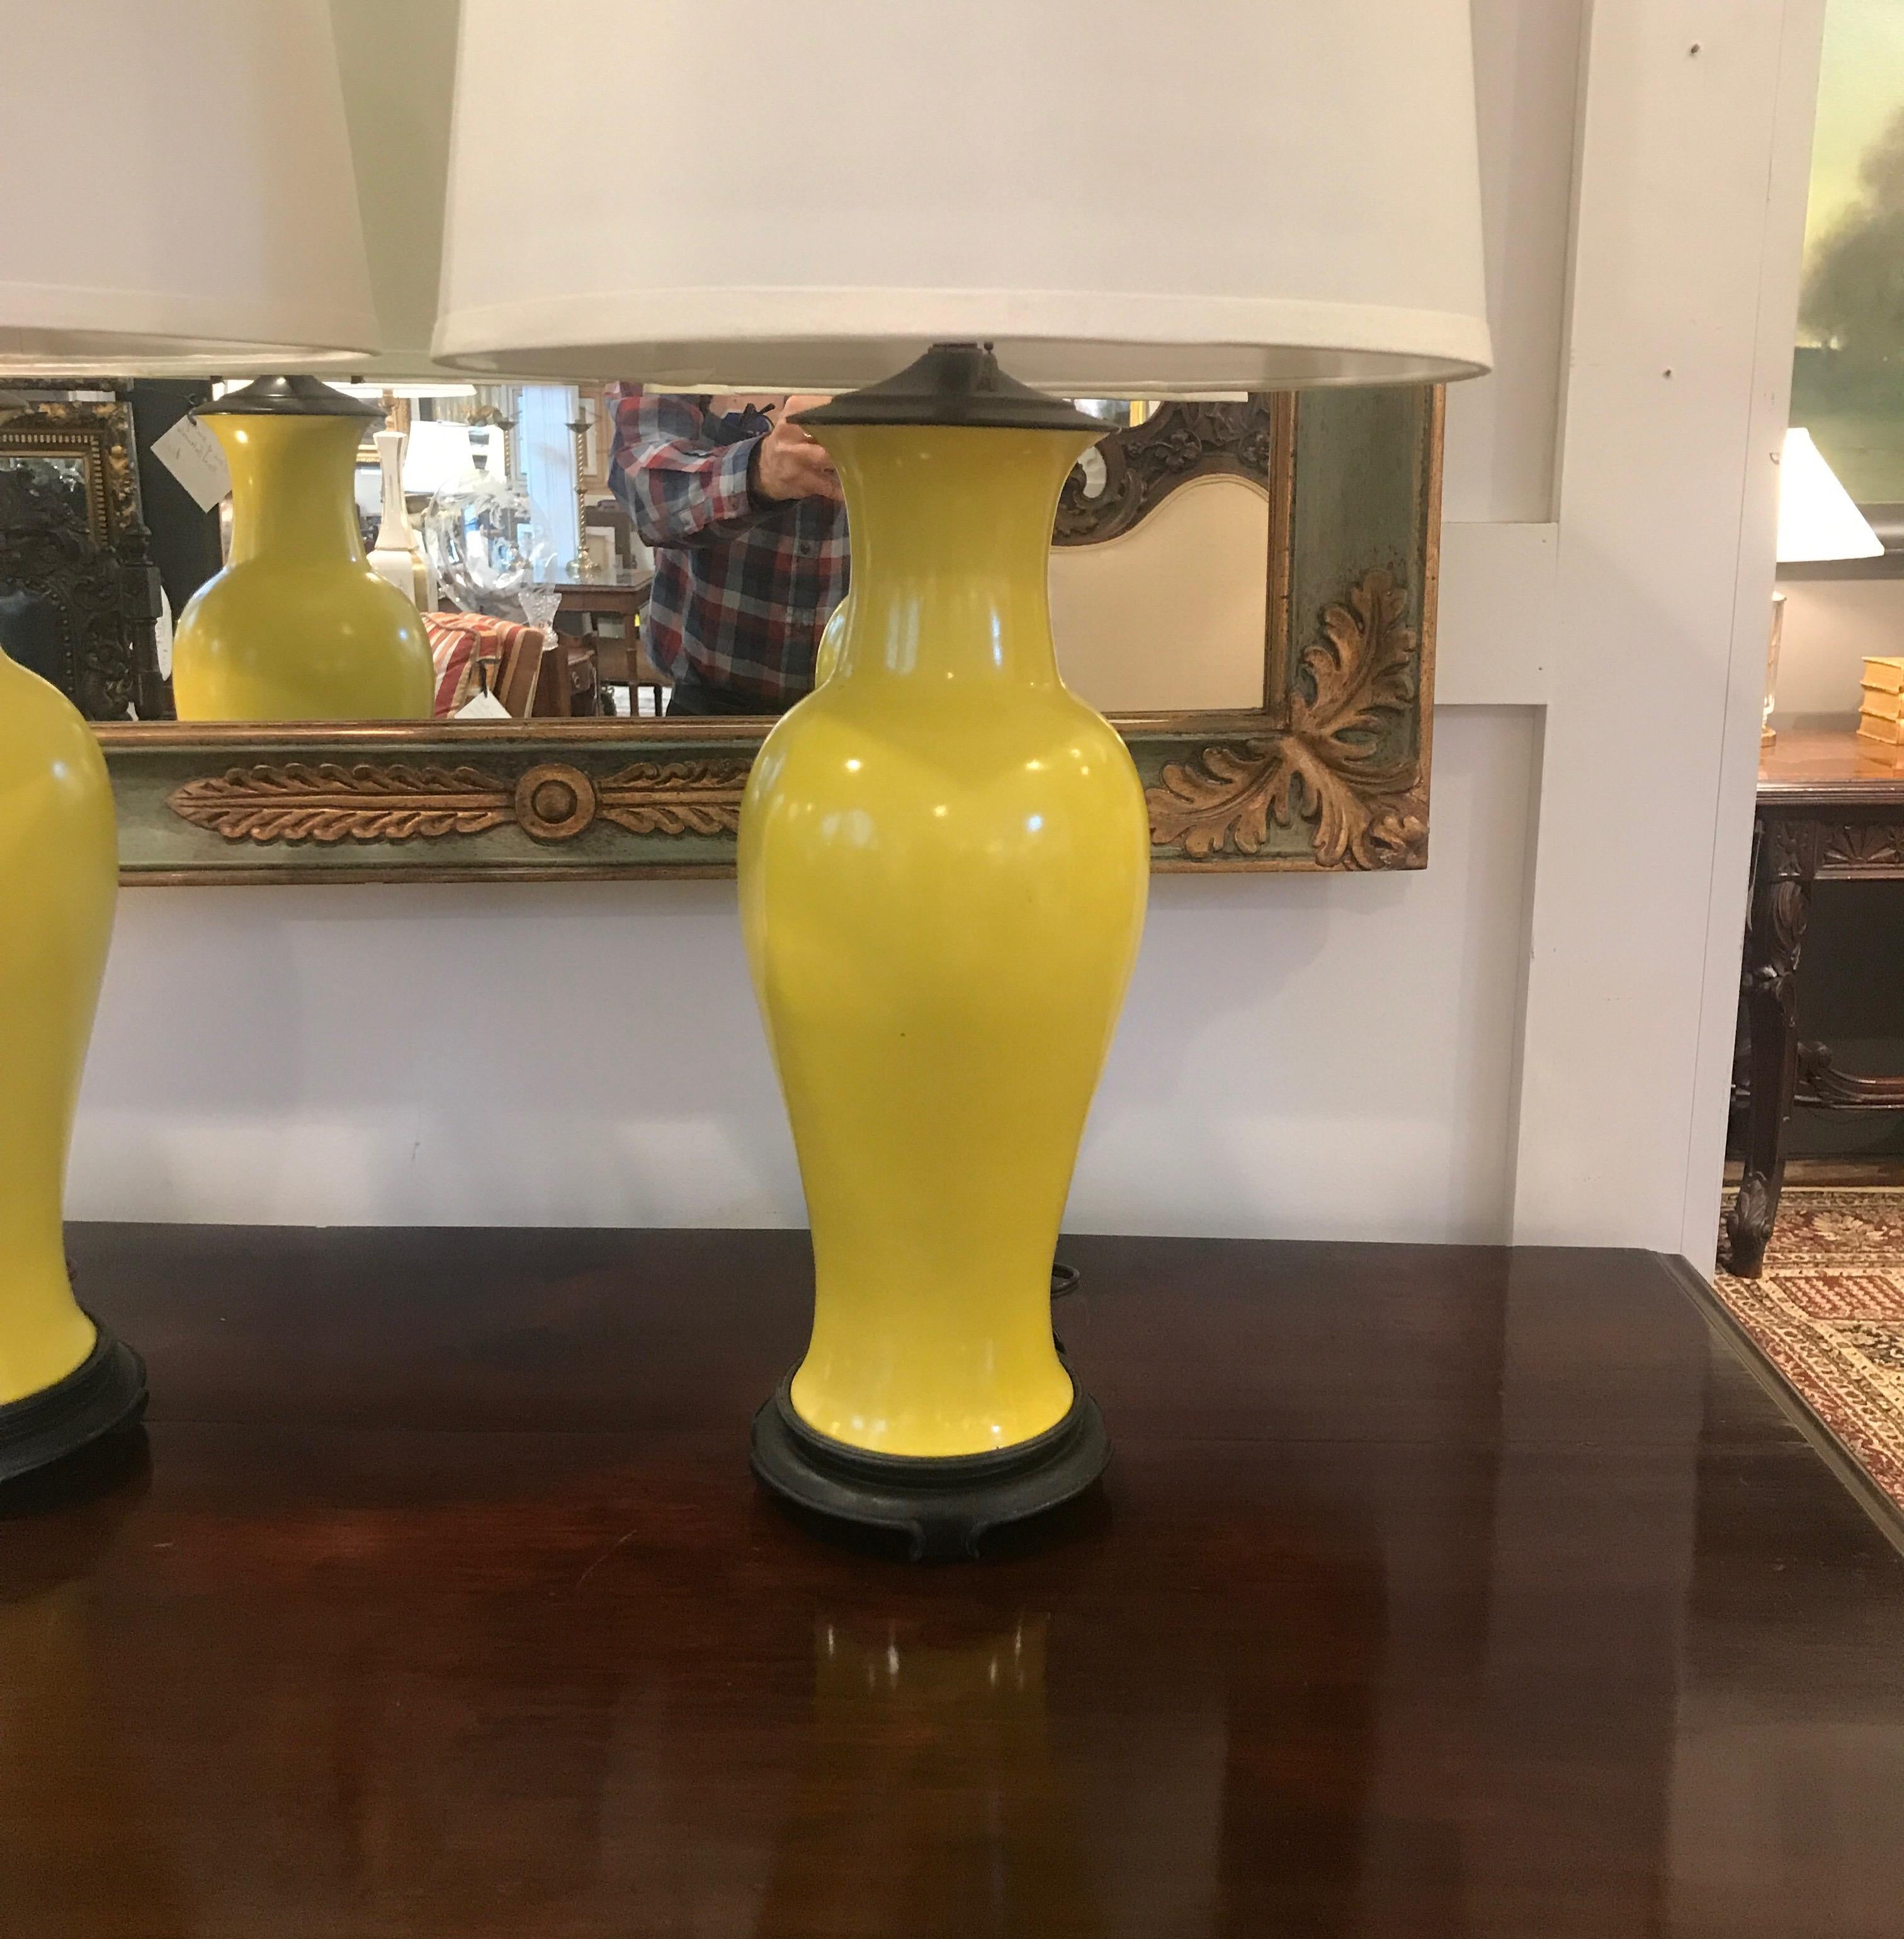 Elegant and classic Chinese porcelain lamps with rosewood bases. These lamps is a vibrant Imperial yellow in a graceful urn vase shape. The shades are for photographic purposes only and not included with the lamps early 20th century, circa